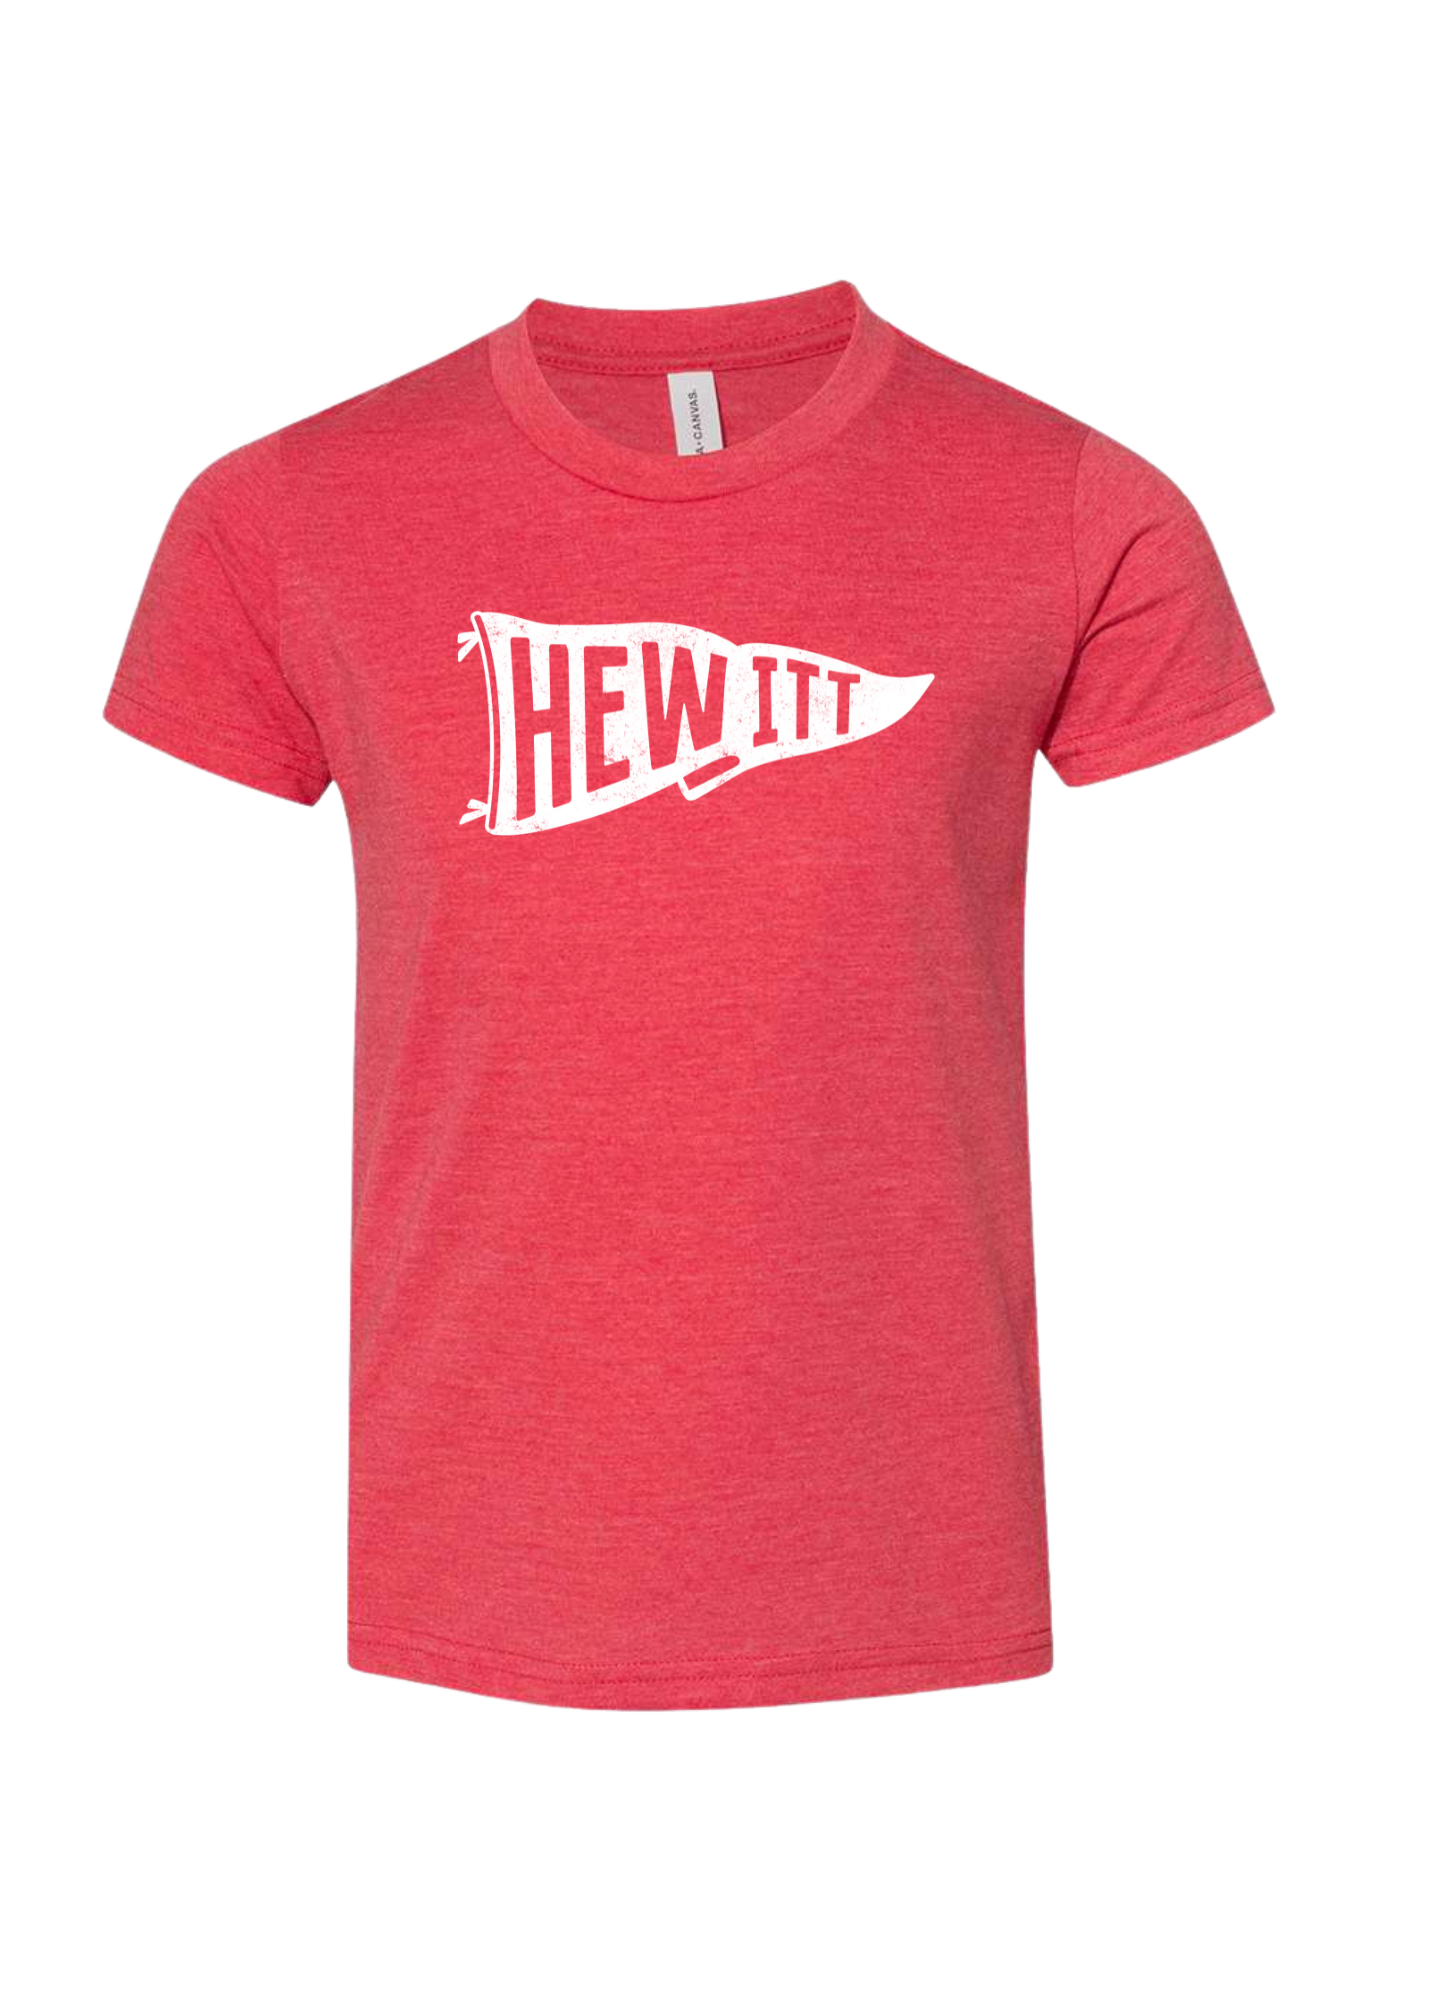 Hewitt Pennant | Kids Tee | RTS-Kids Tees-Sister Shirts-Sister Shirts, Cute & Custom Tees for Mama & Littles in Trussville, Alabama.